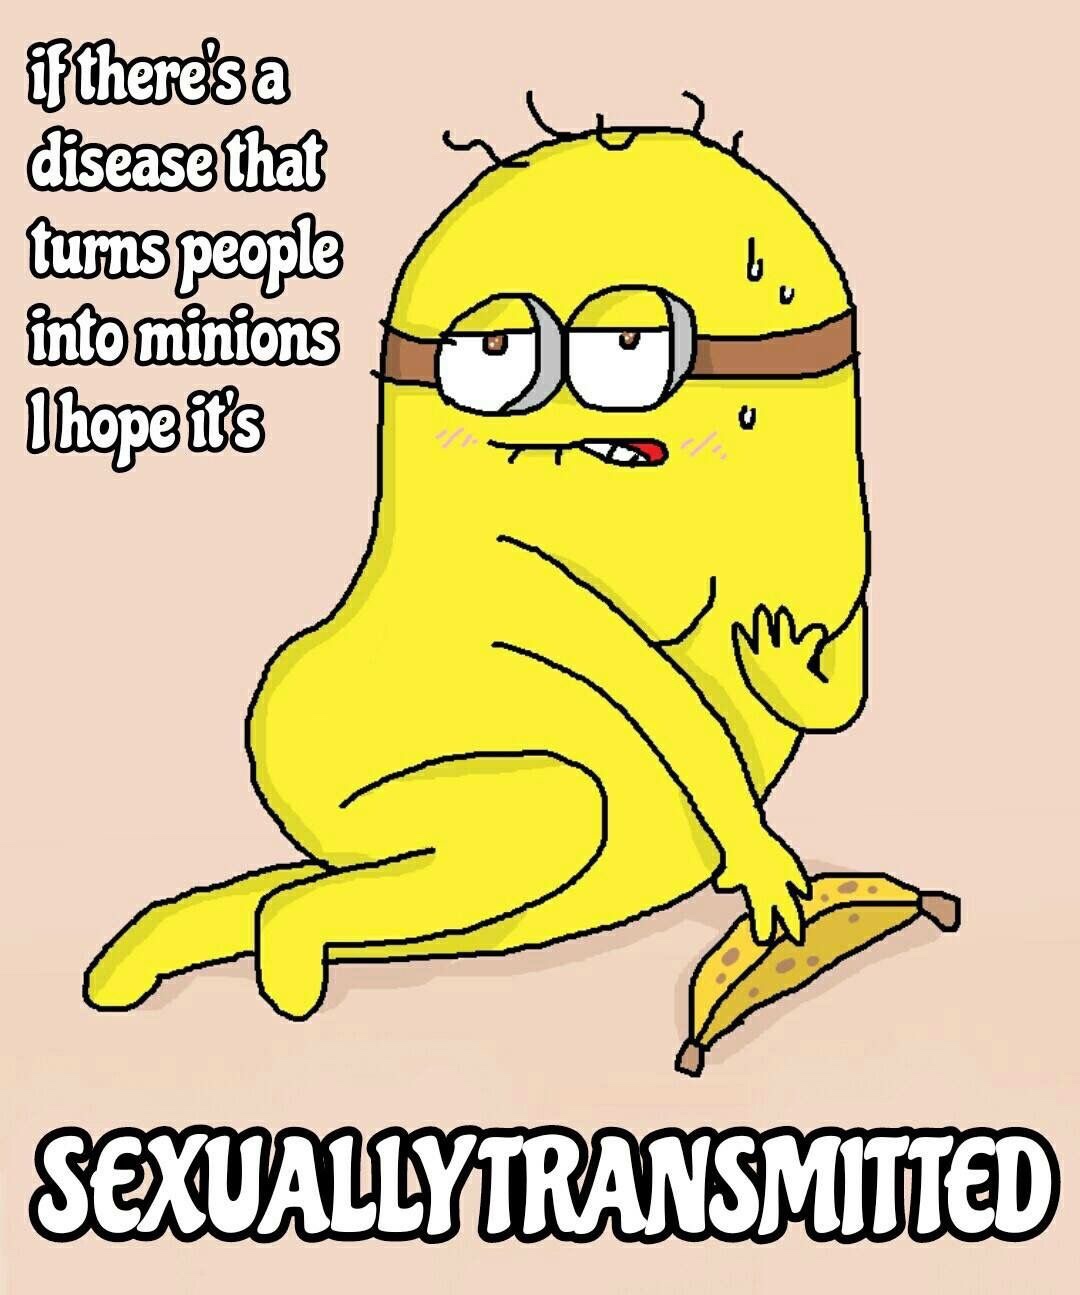 cursed images minions - if there's a disease that turns people into minions Thope it's Sexually Transmitted